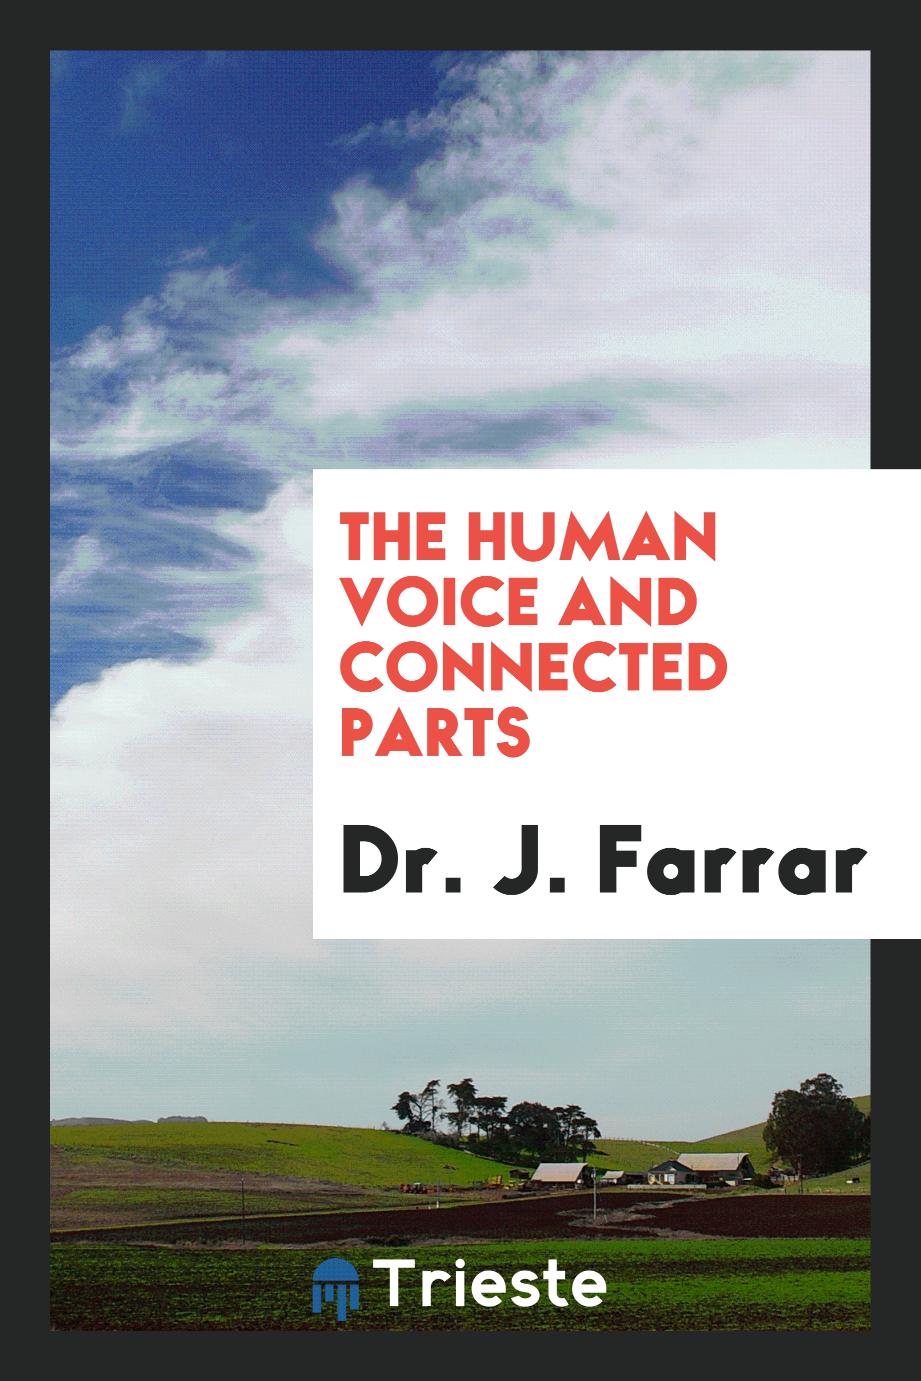 The Human Voice and Connected Parts